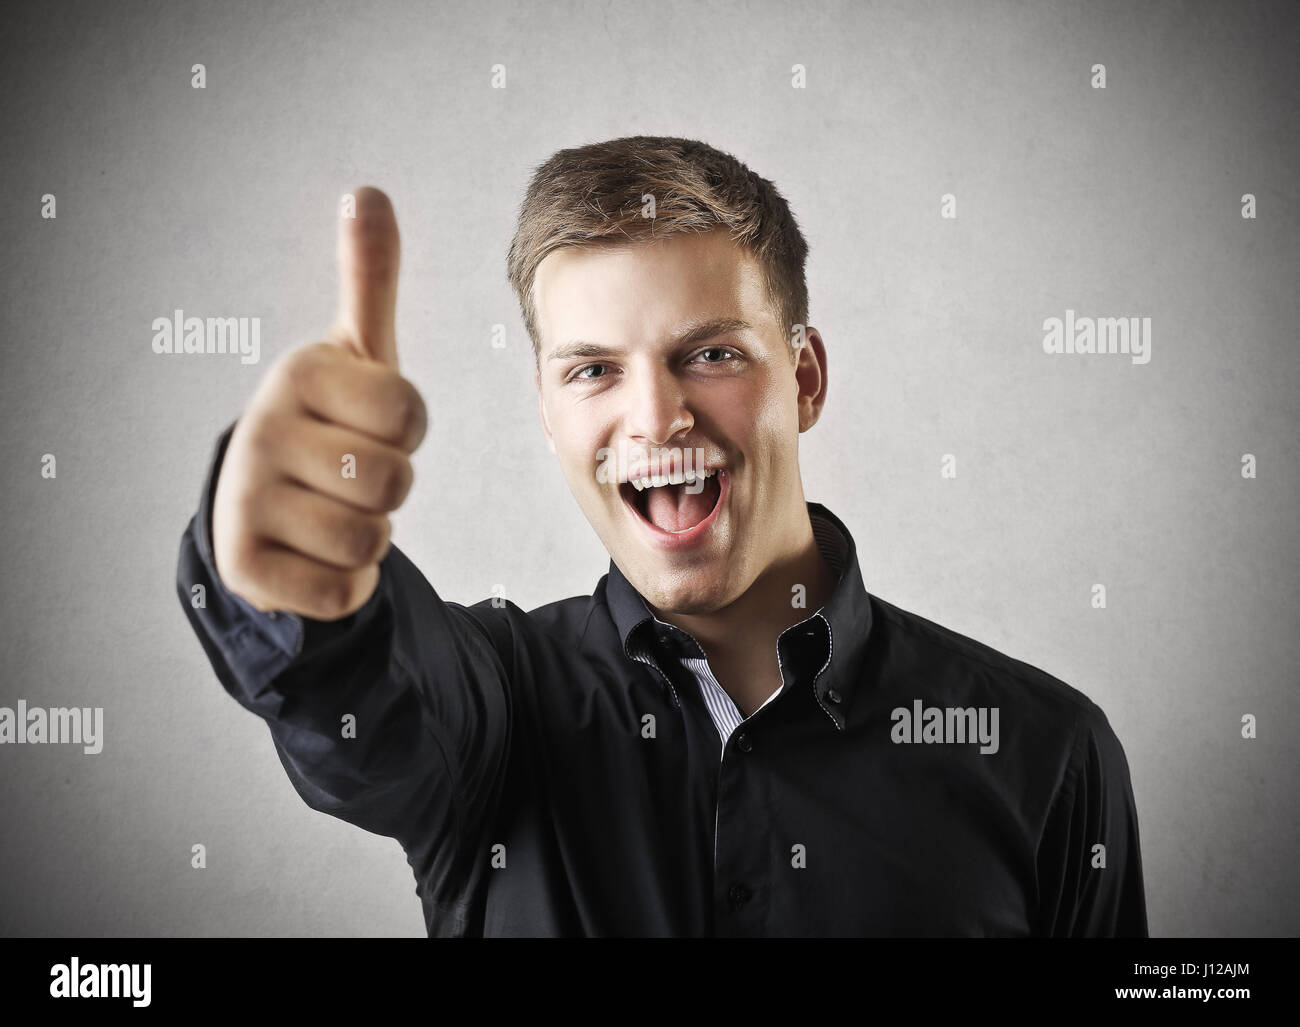 Happy young man showing like sign Stock Photo